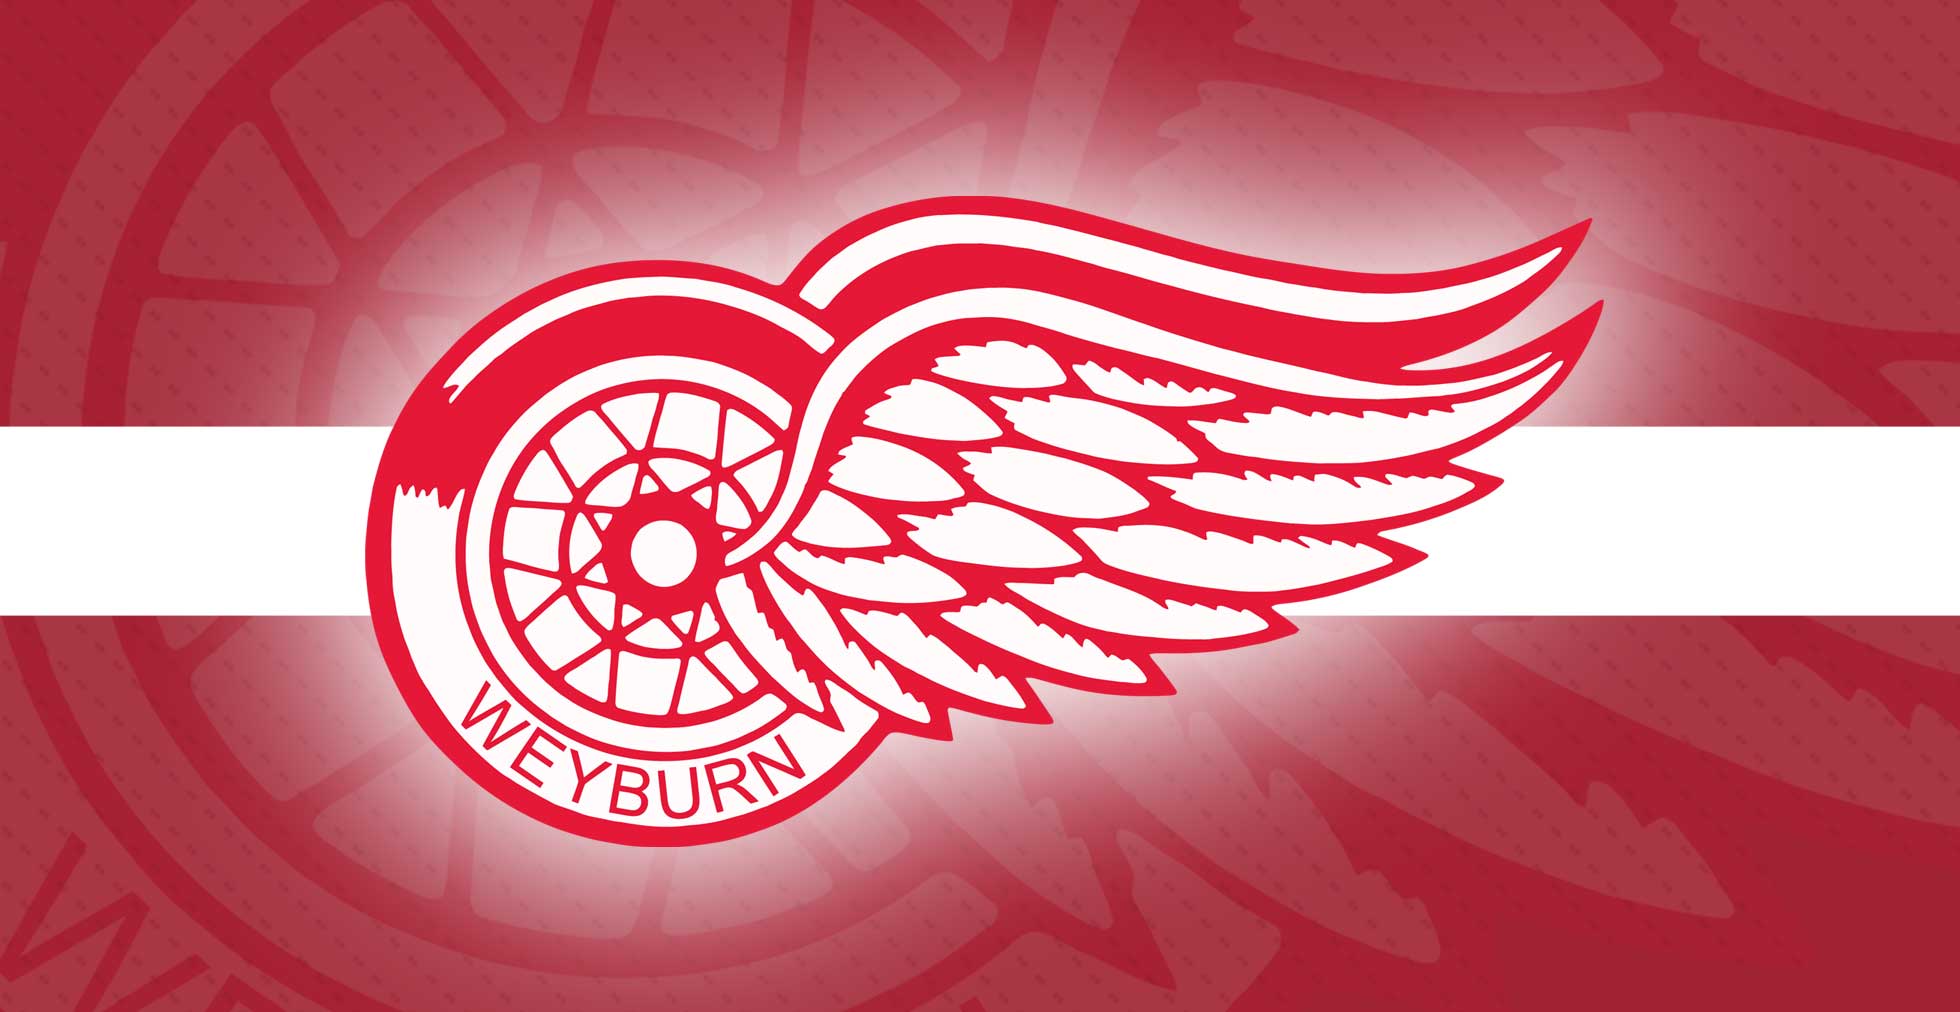 Four Red Wings on the Bubble to Make The 2022-2023 Roster